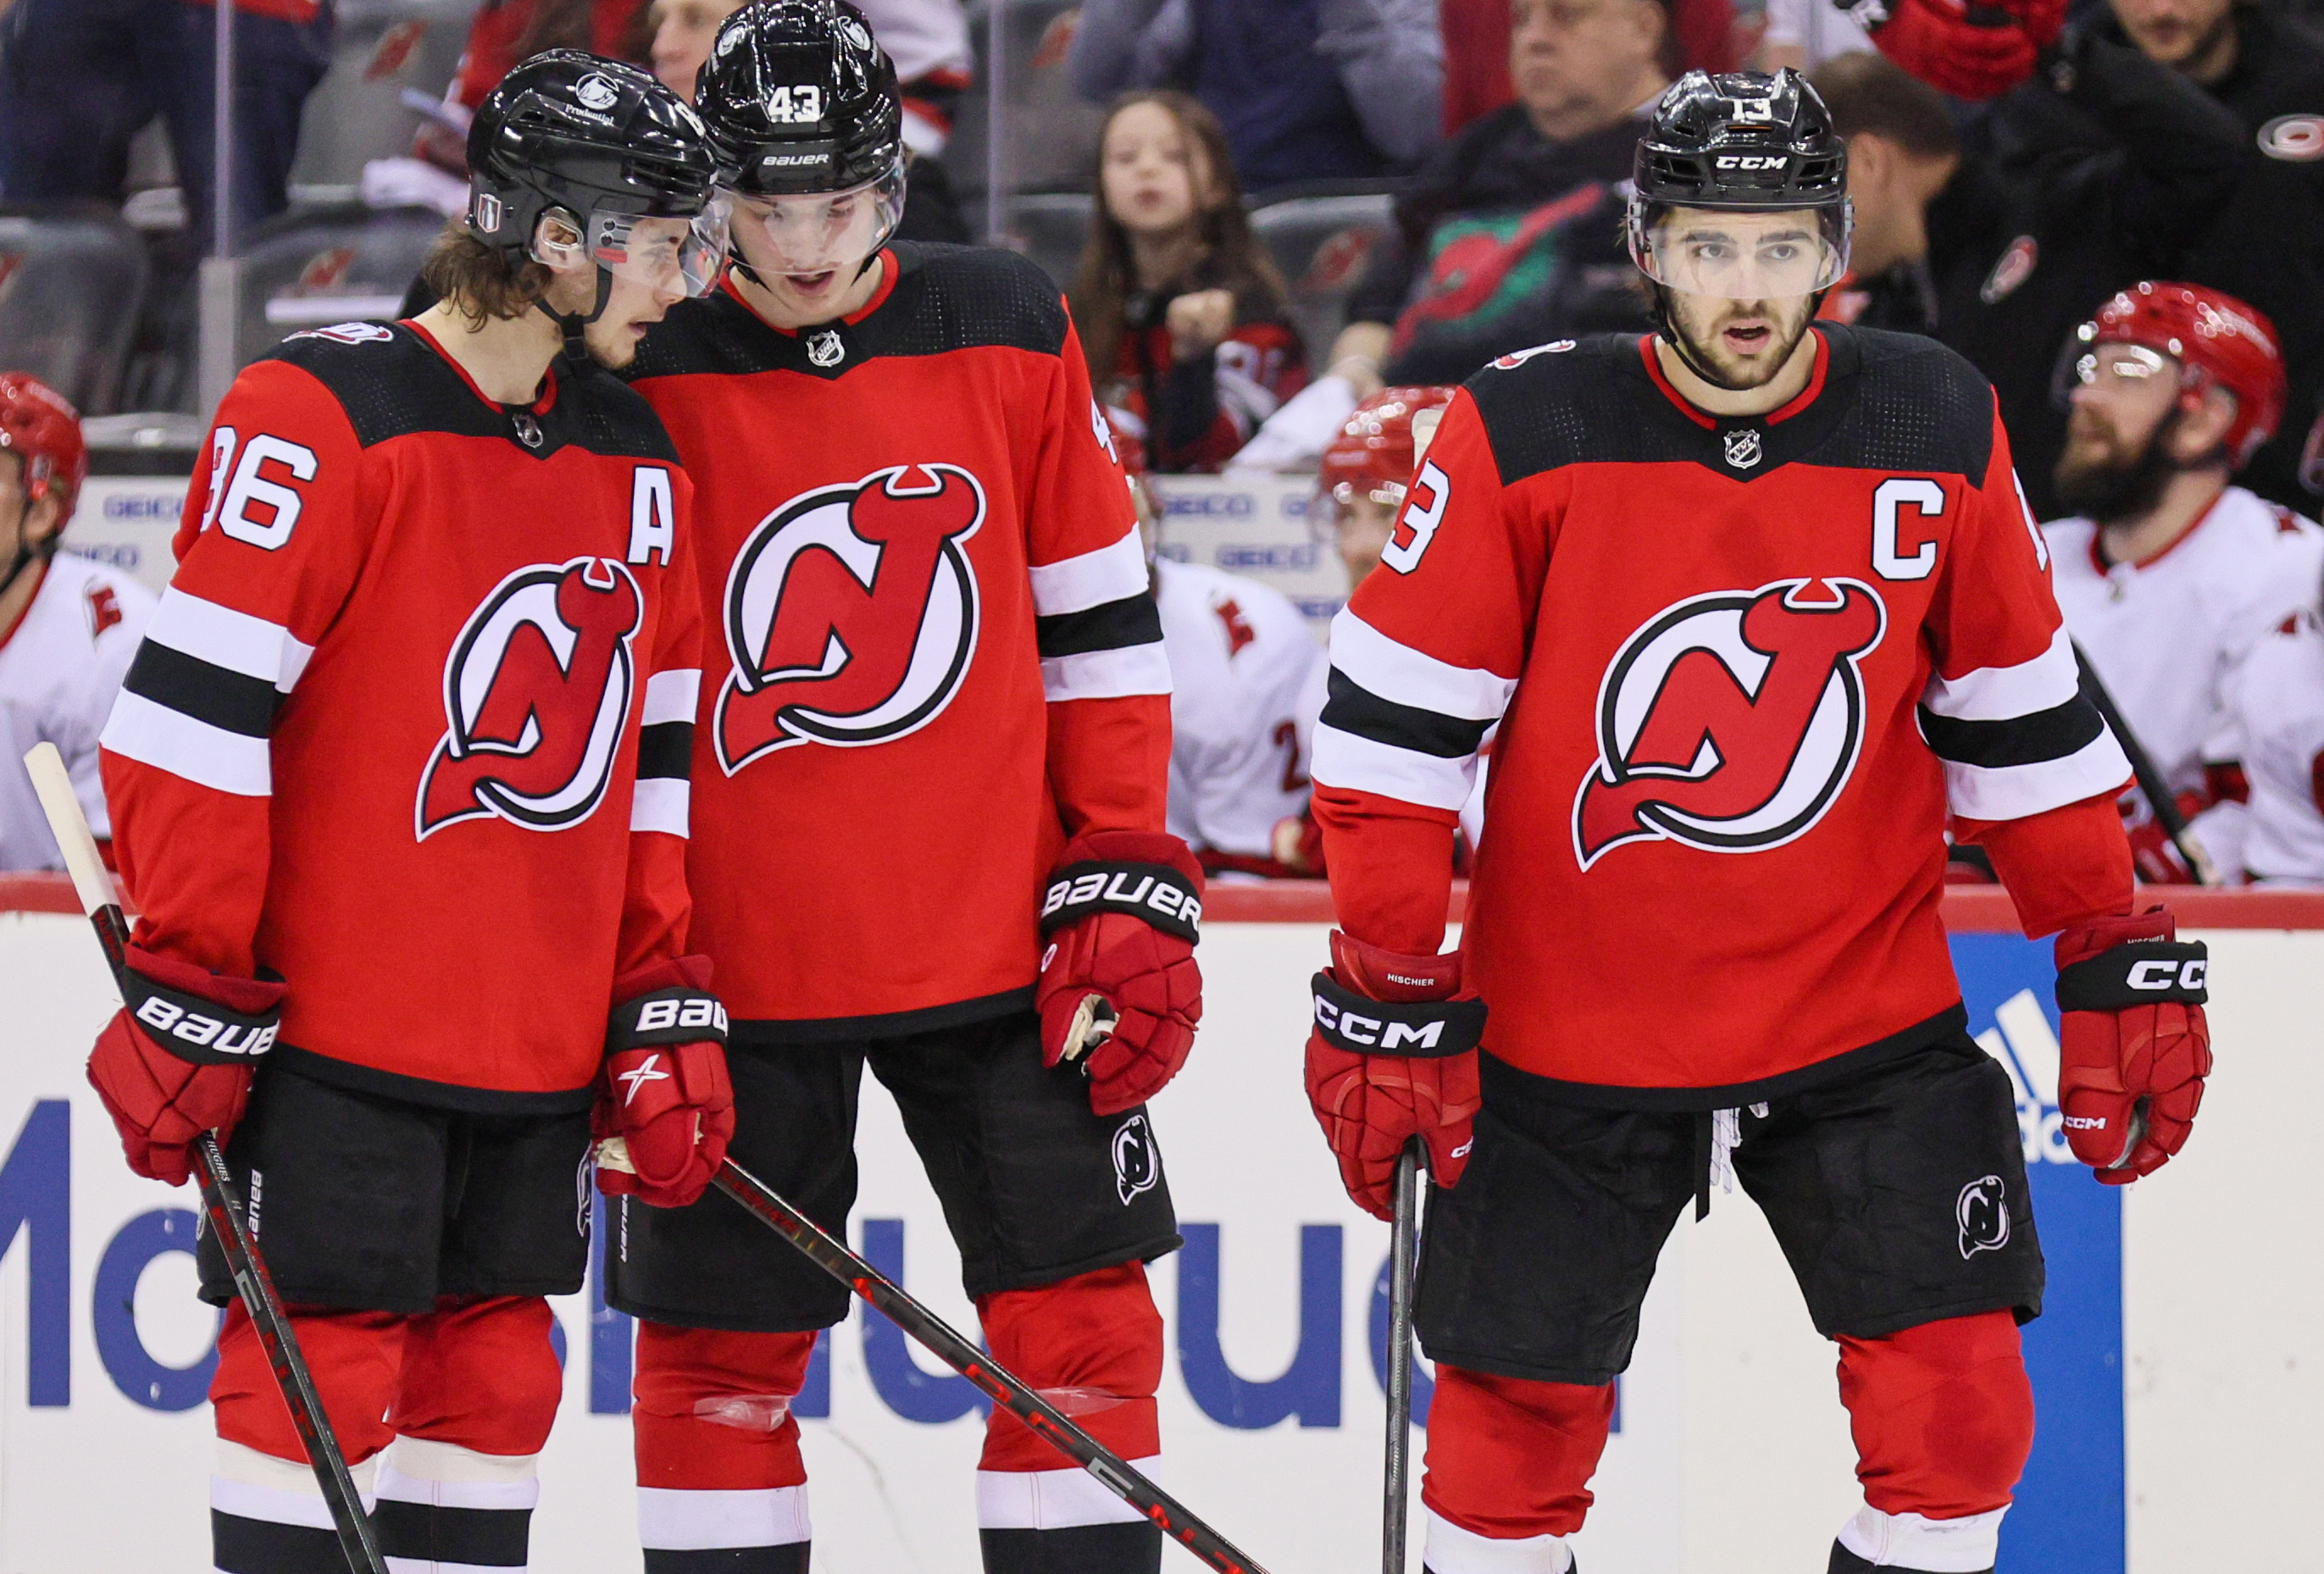 Devils still have issues to fix, despite 8-4 trouncing of